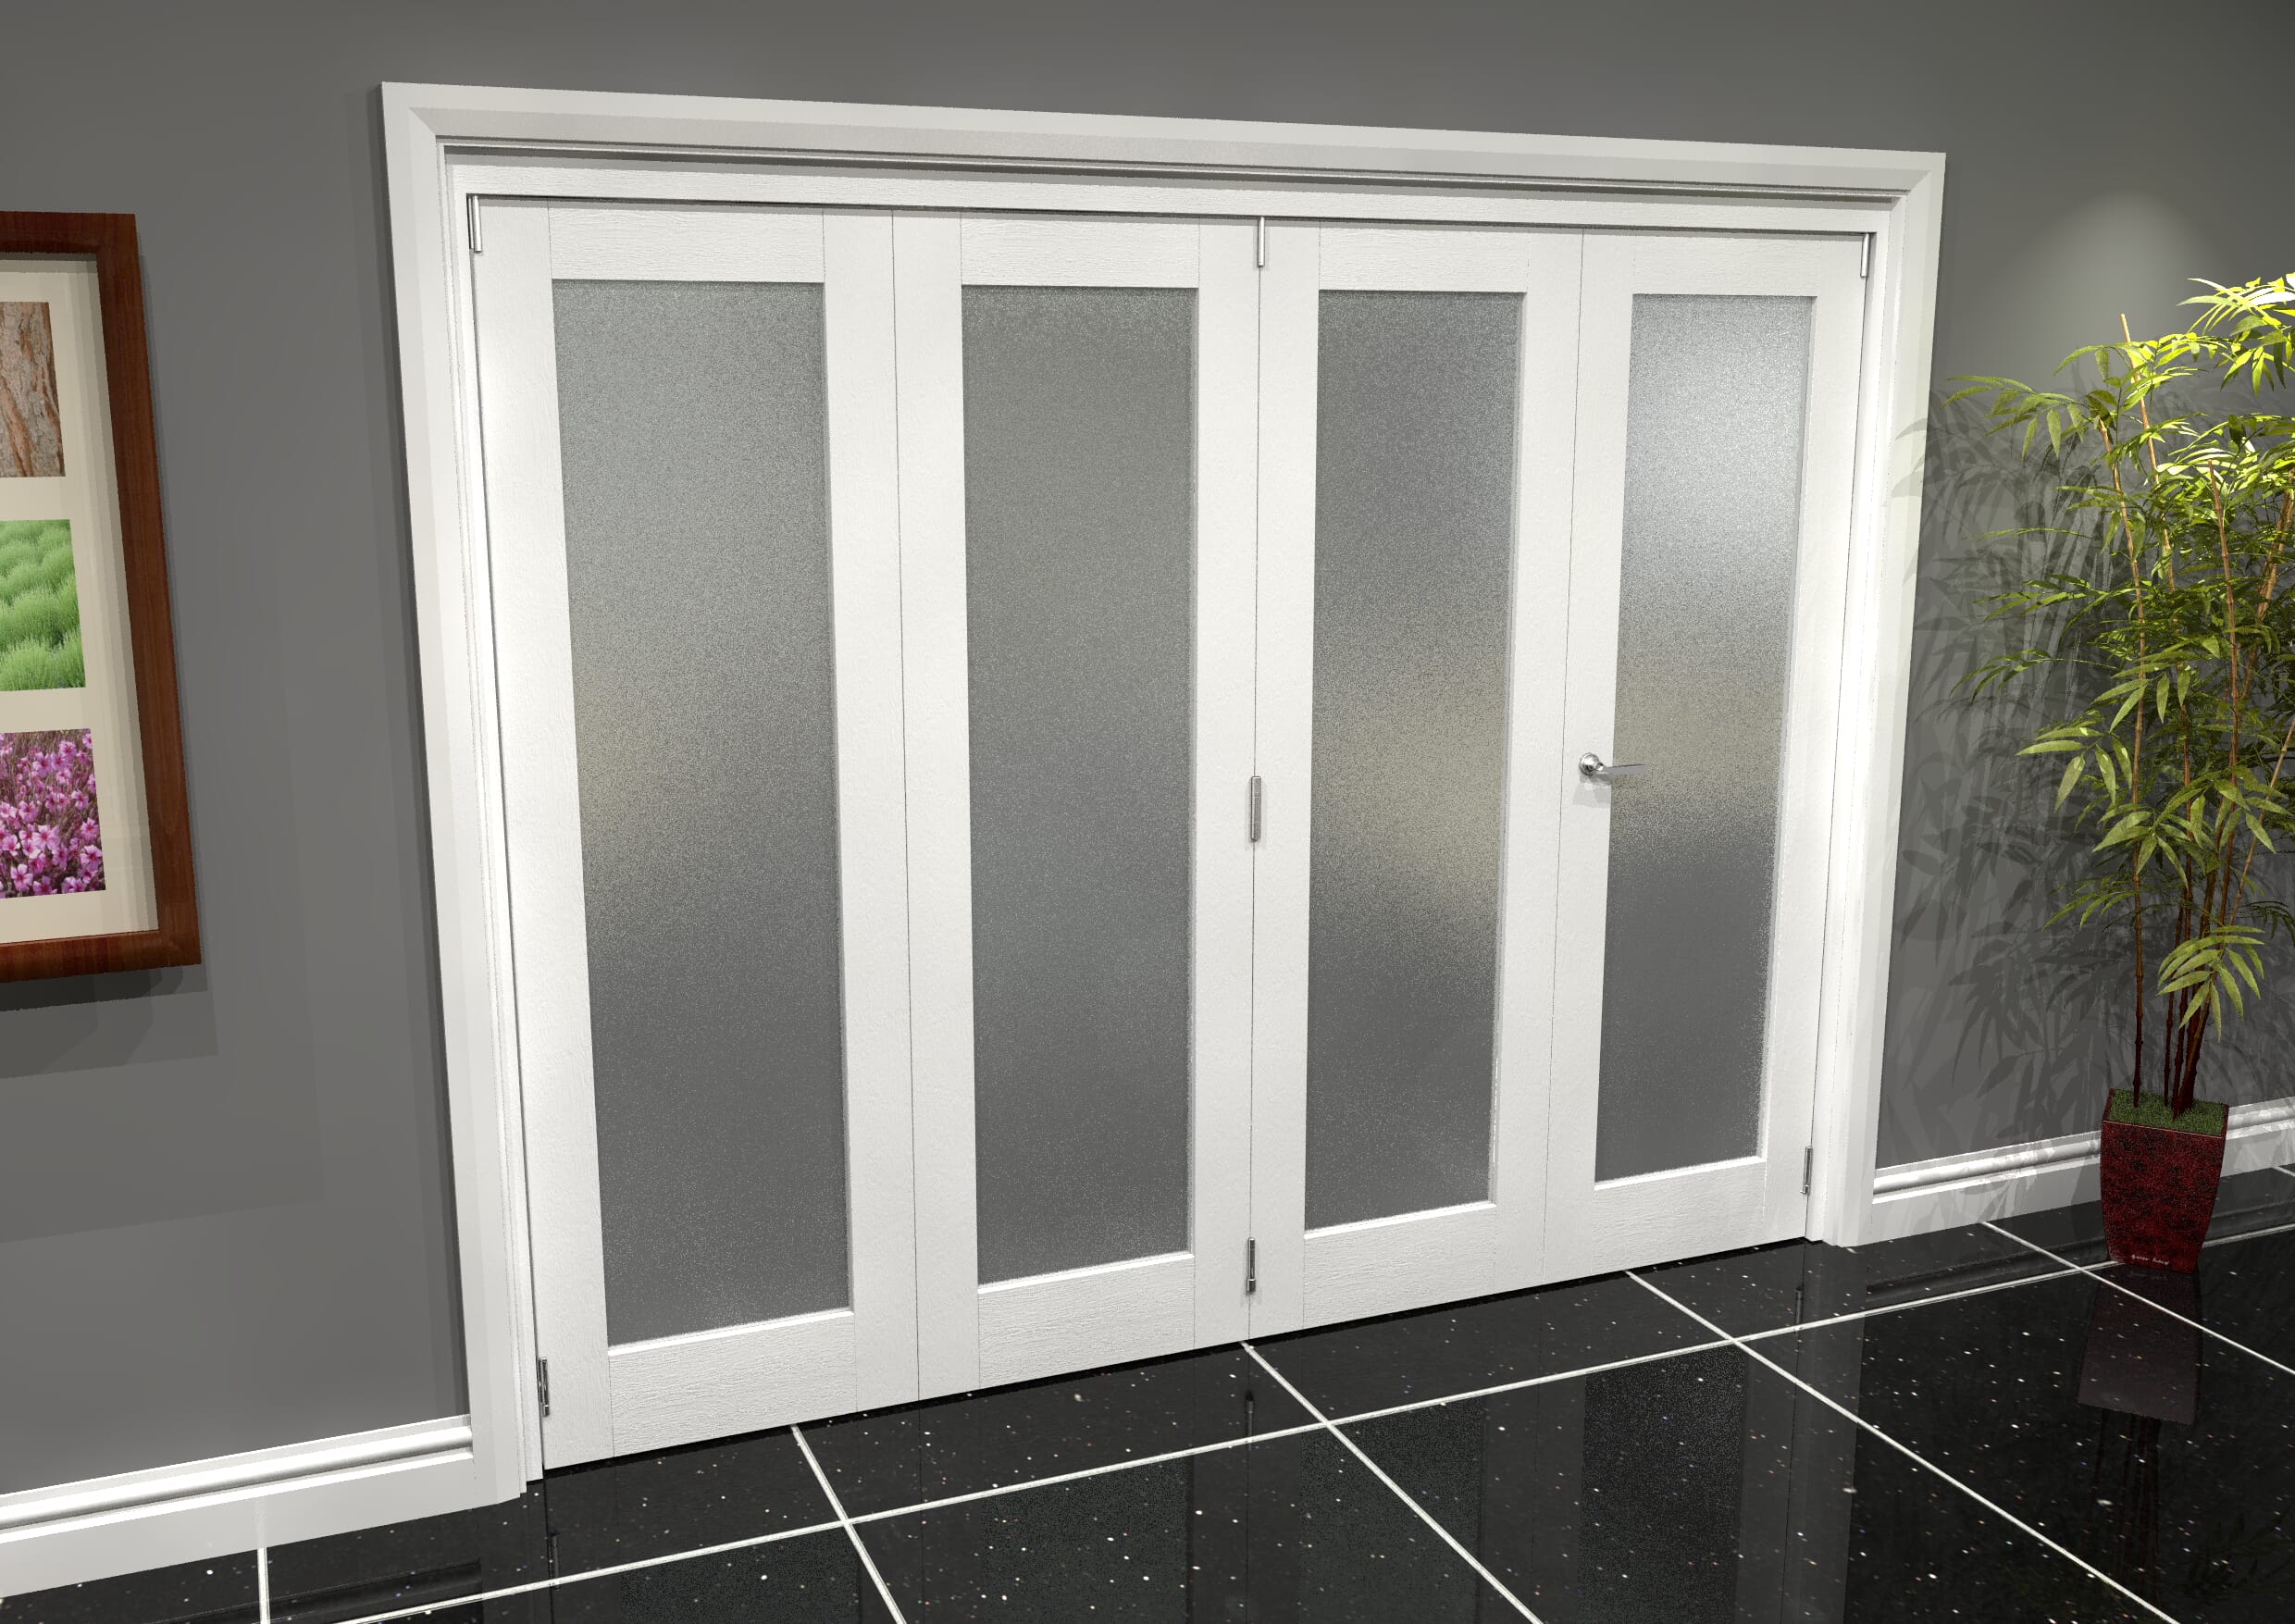 2538 X 2070 White Primed Internal Folding Door System With Frosted Glass